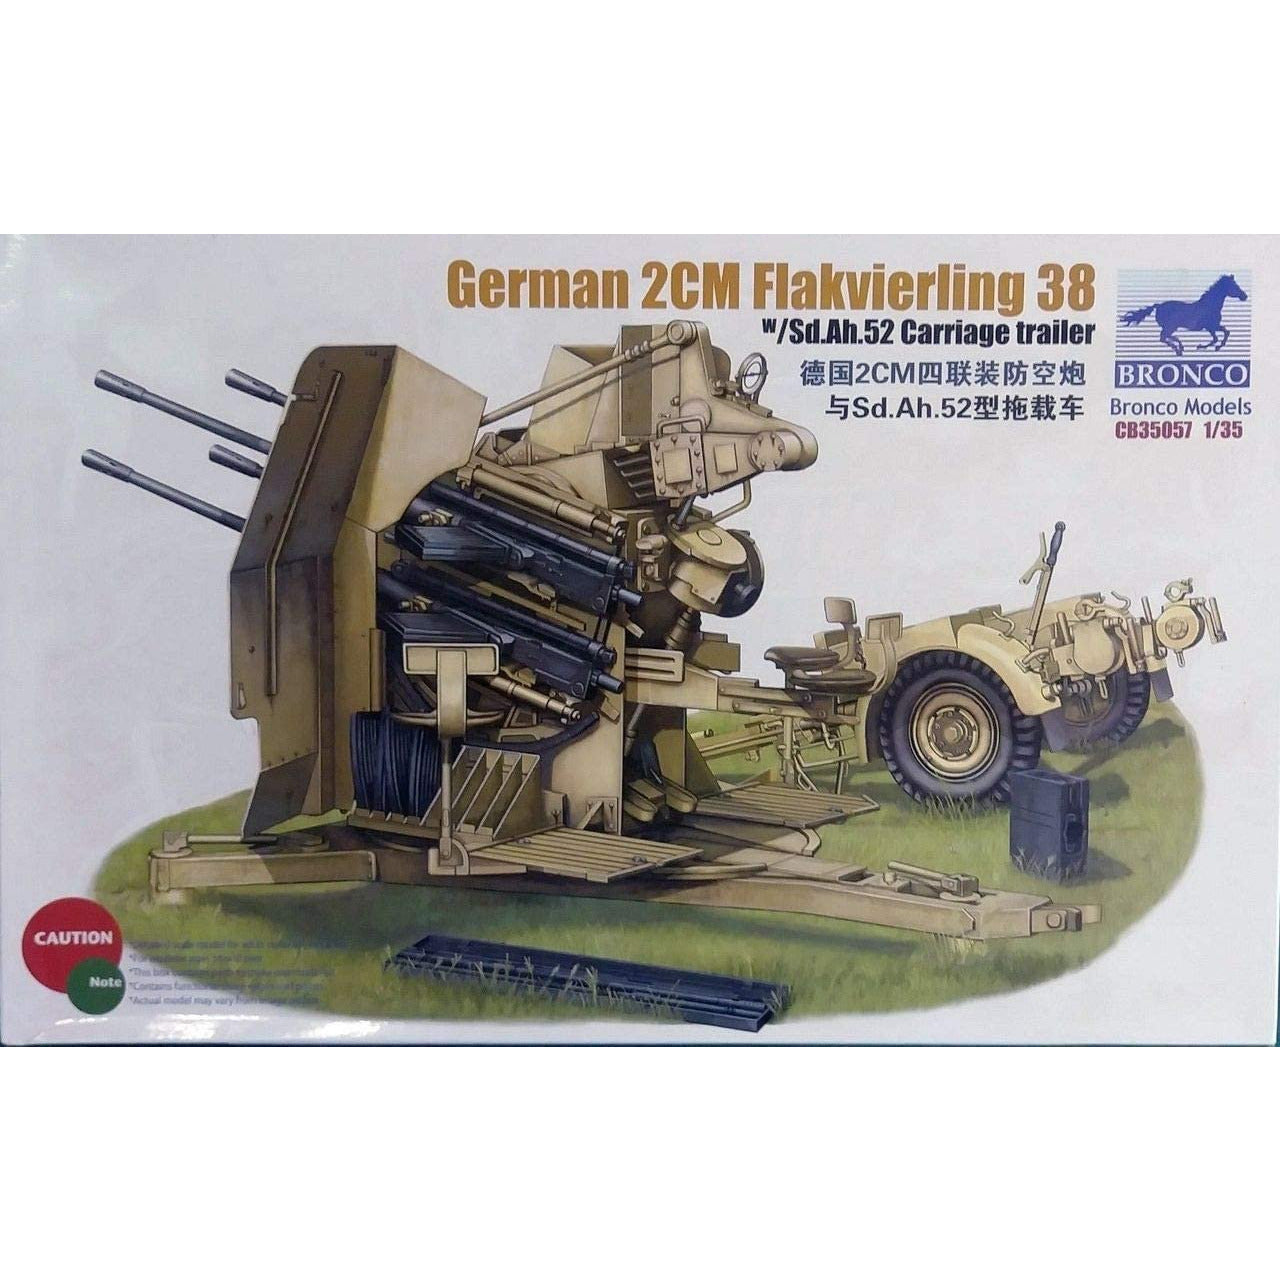 2CM Flakervierling 38 w/Carriage trailer 1/35 by Bronco